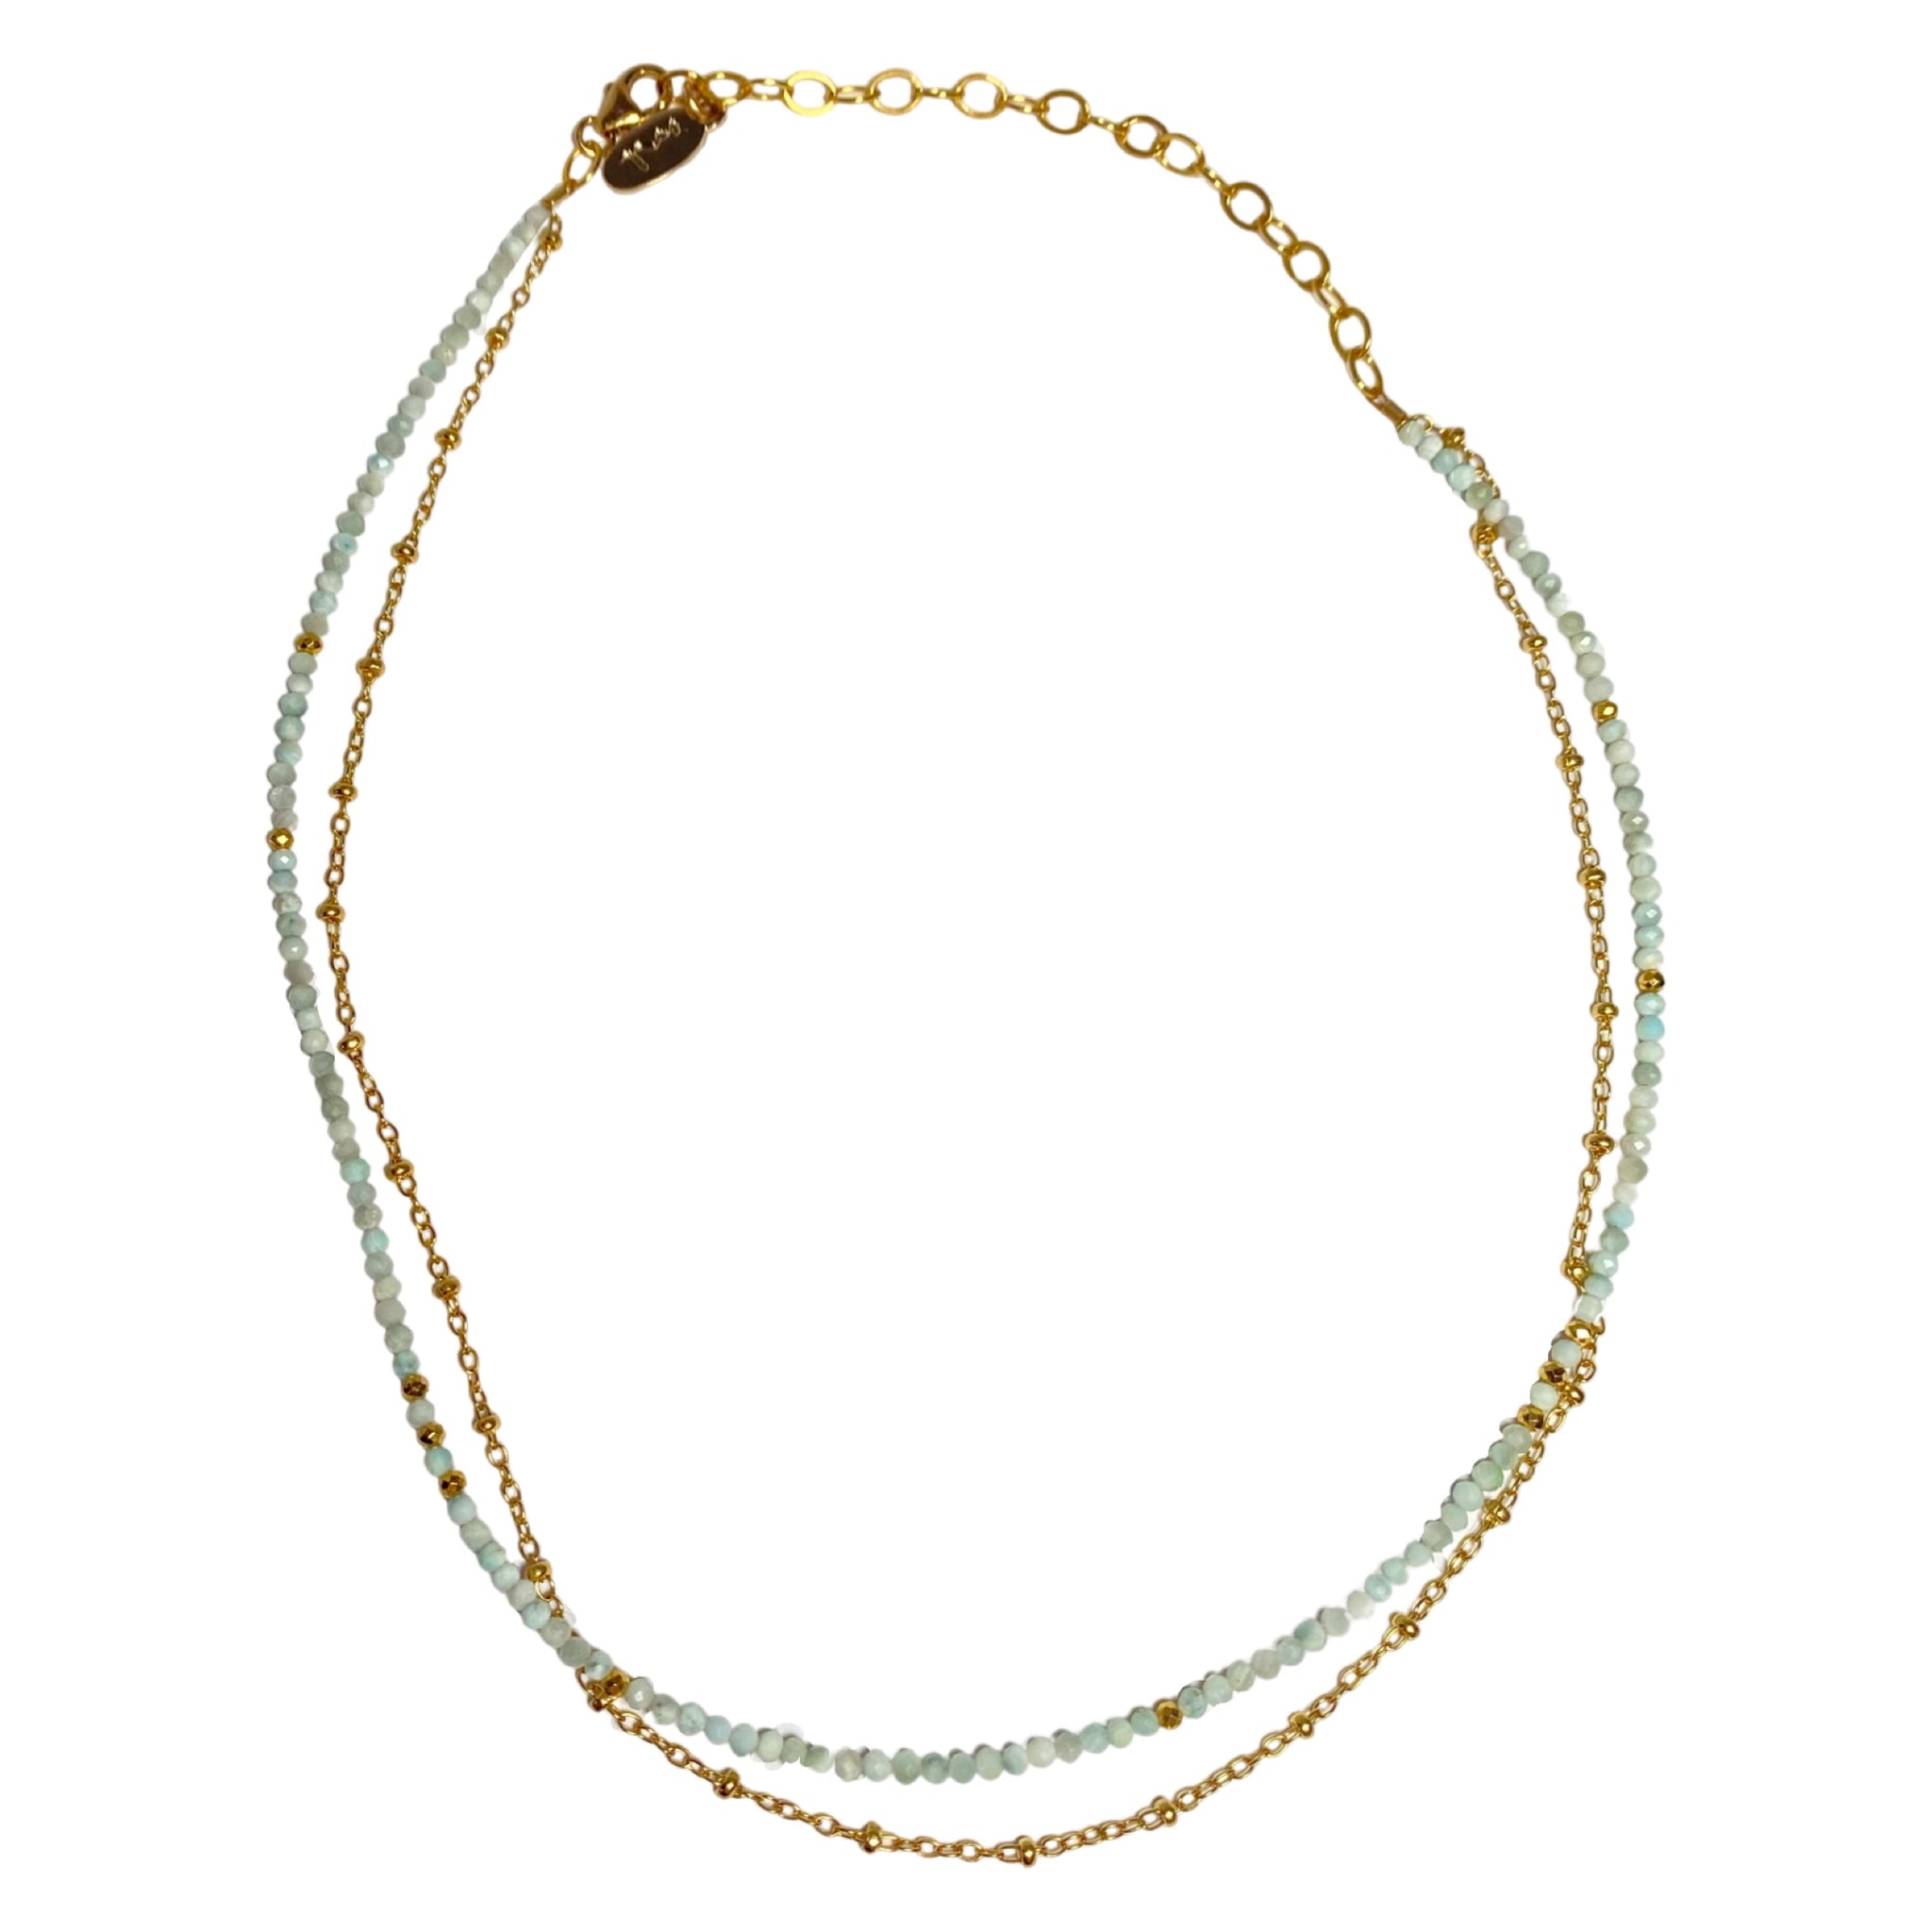 Mickey Lynn Larimar Choker - Available at Shaylula Jewlery & Gifts in Tarrytown, NY and online. A versatile foundation piece, this larimar beaded necklace has a gold sister chain attached and can be worn as a choker or wrapped twice and worn as a bracelet. •  Larimar, 14k gold filled • 12" - 15" L  • Lobster clasp